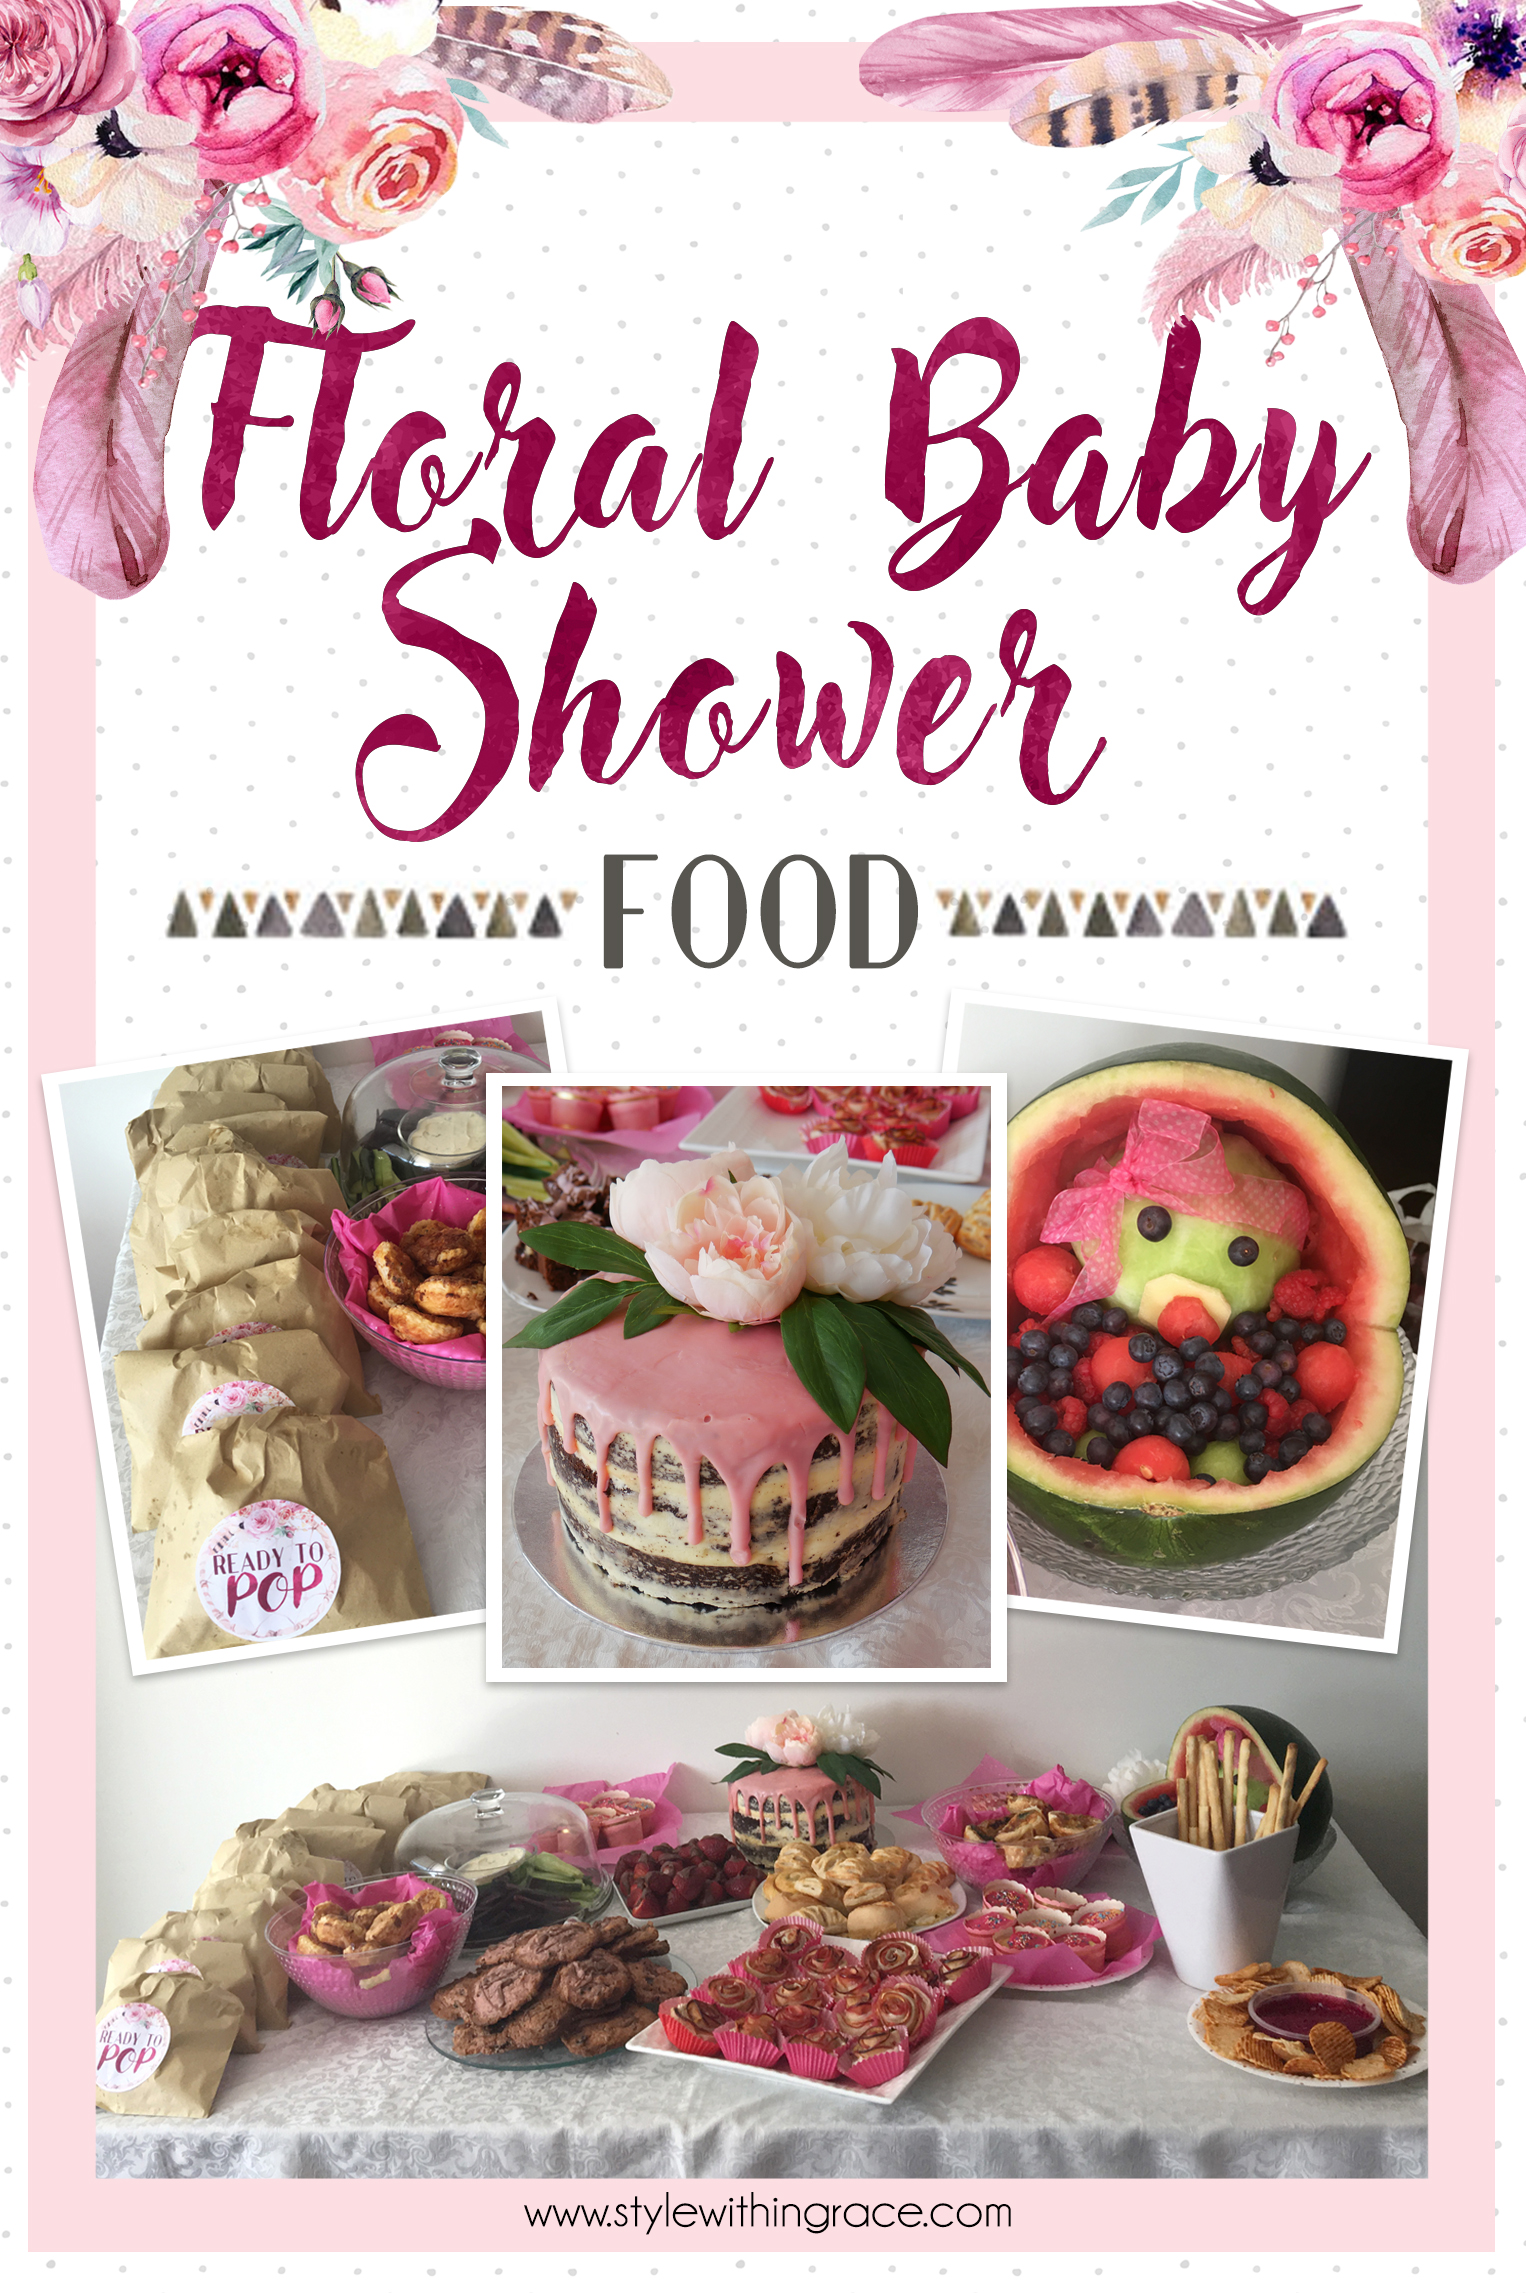 Floral Baby Shower Style Within Grace